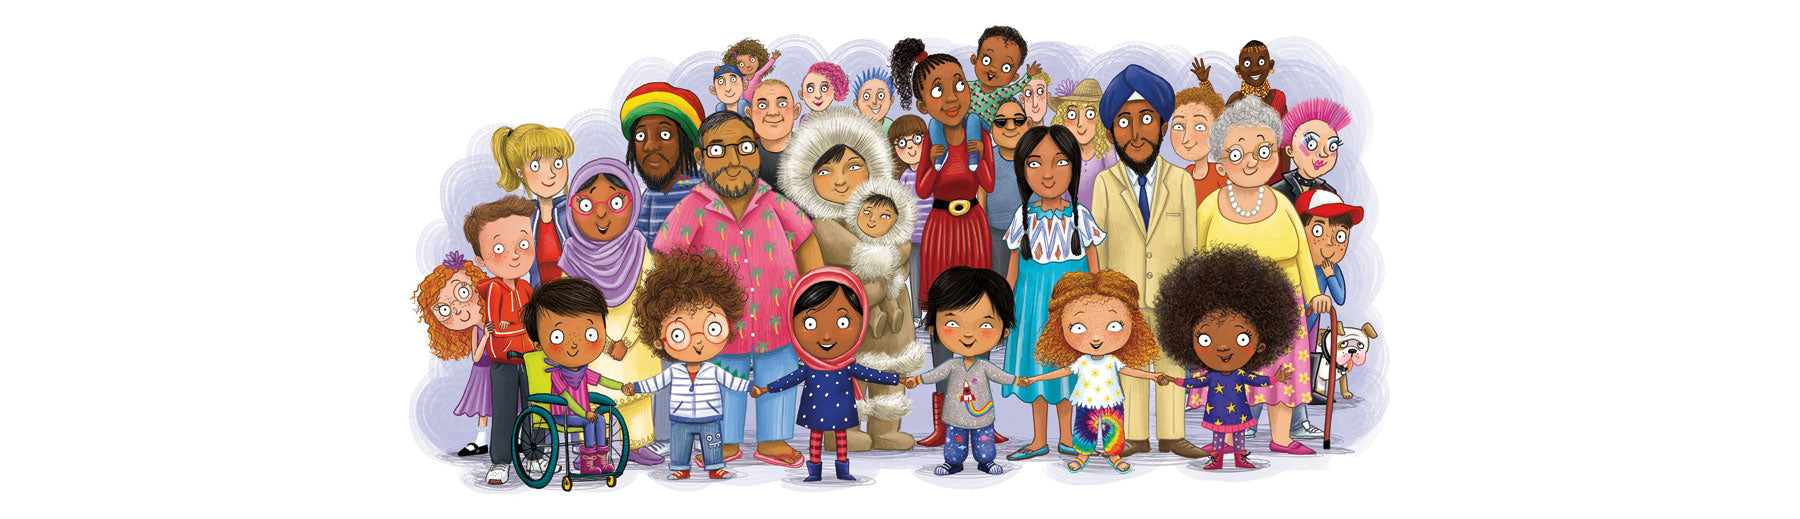 A cartoon of a large group of ethnically diverse adults and children. 